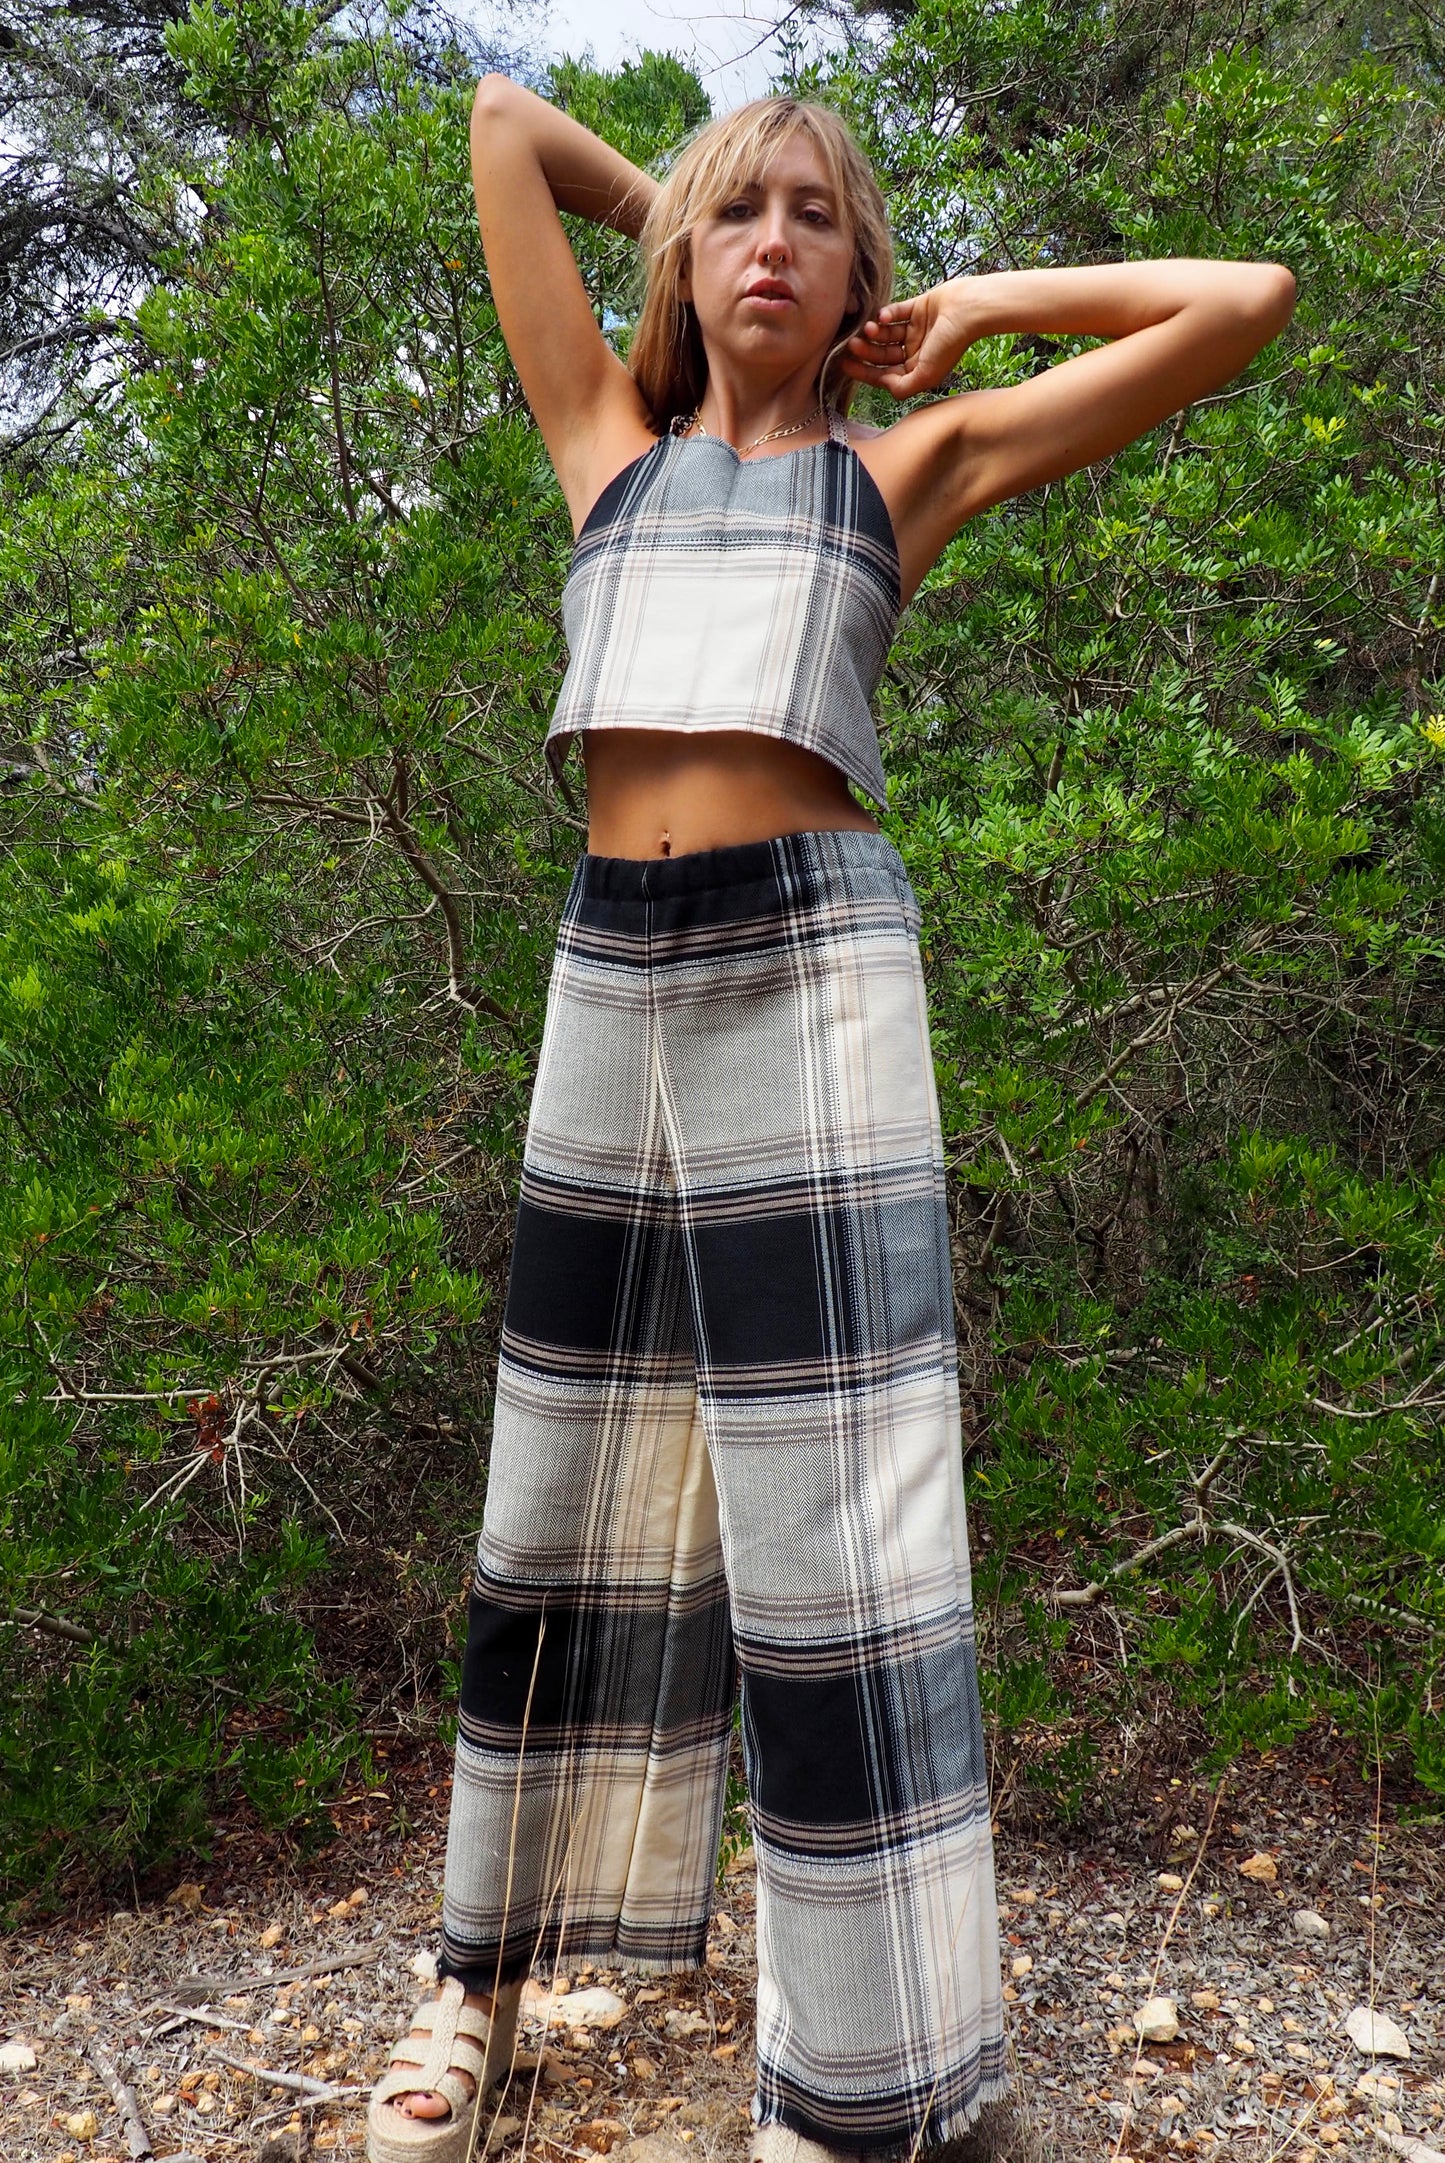 Up-cycled black and white checked tie crop top with nice quality a high end woven made by Vagabond Ibiza